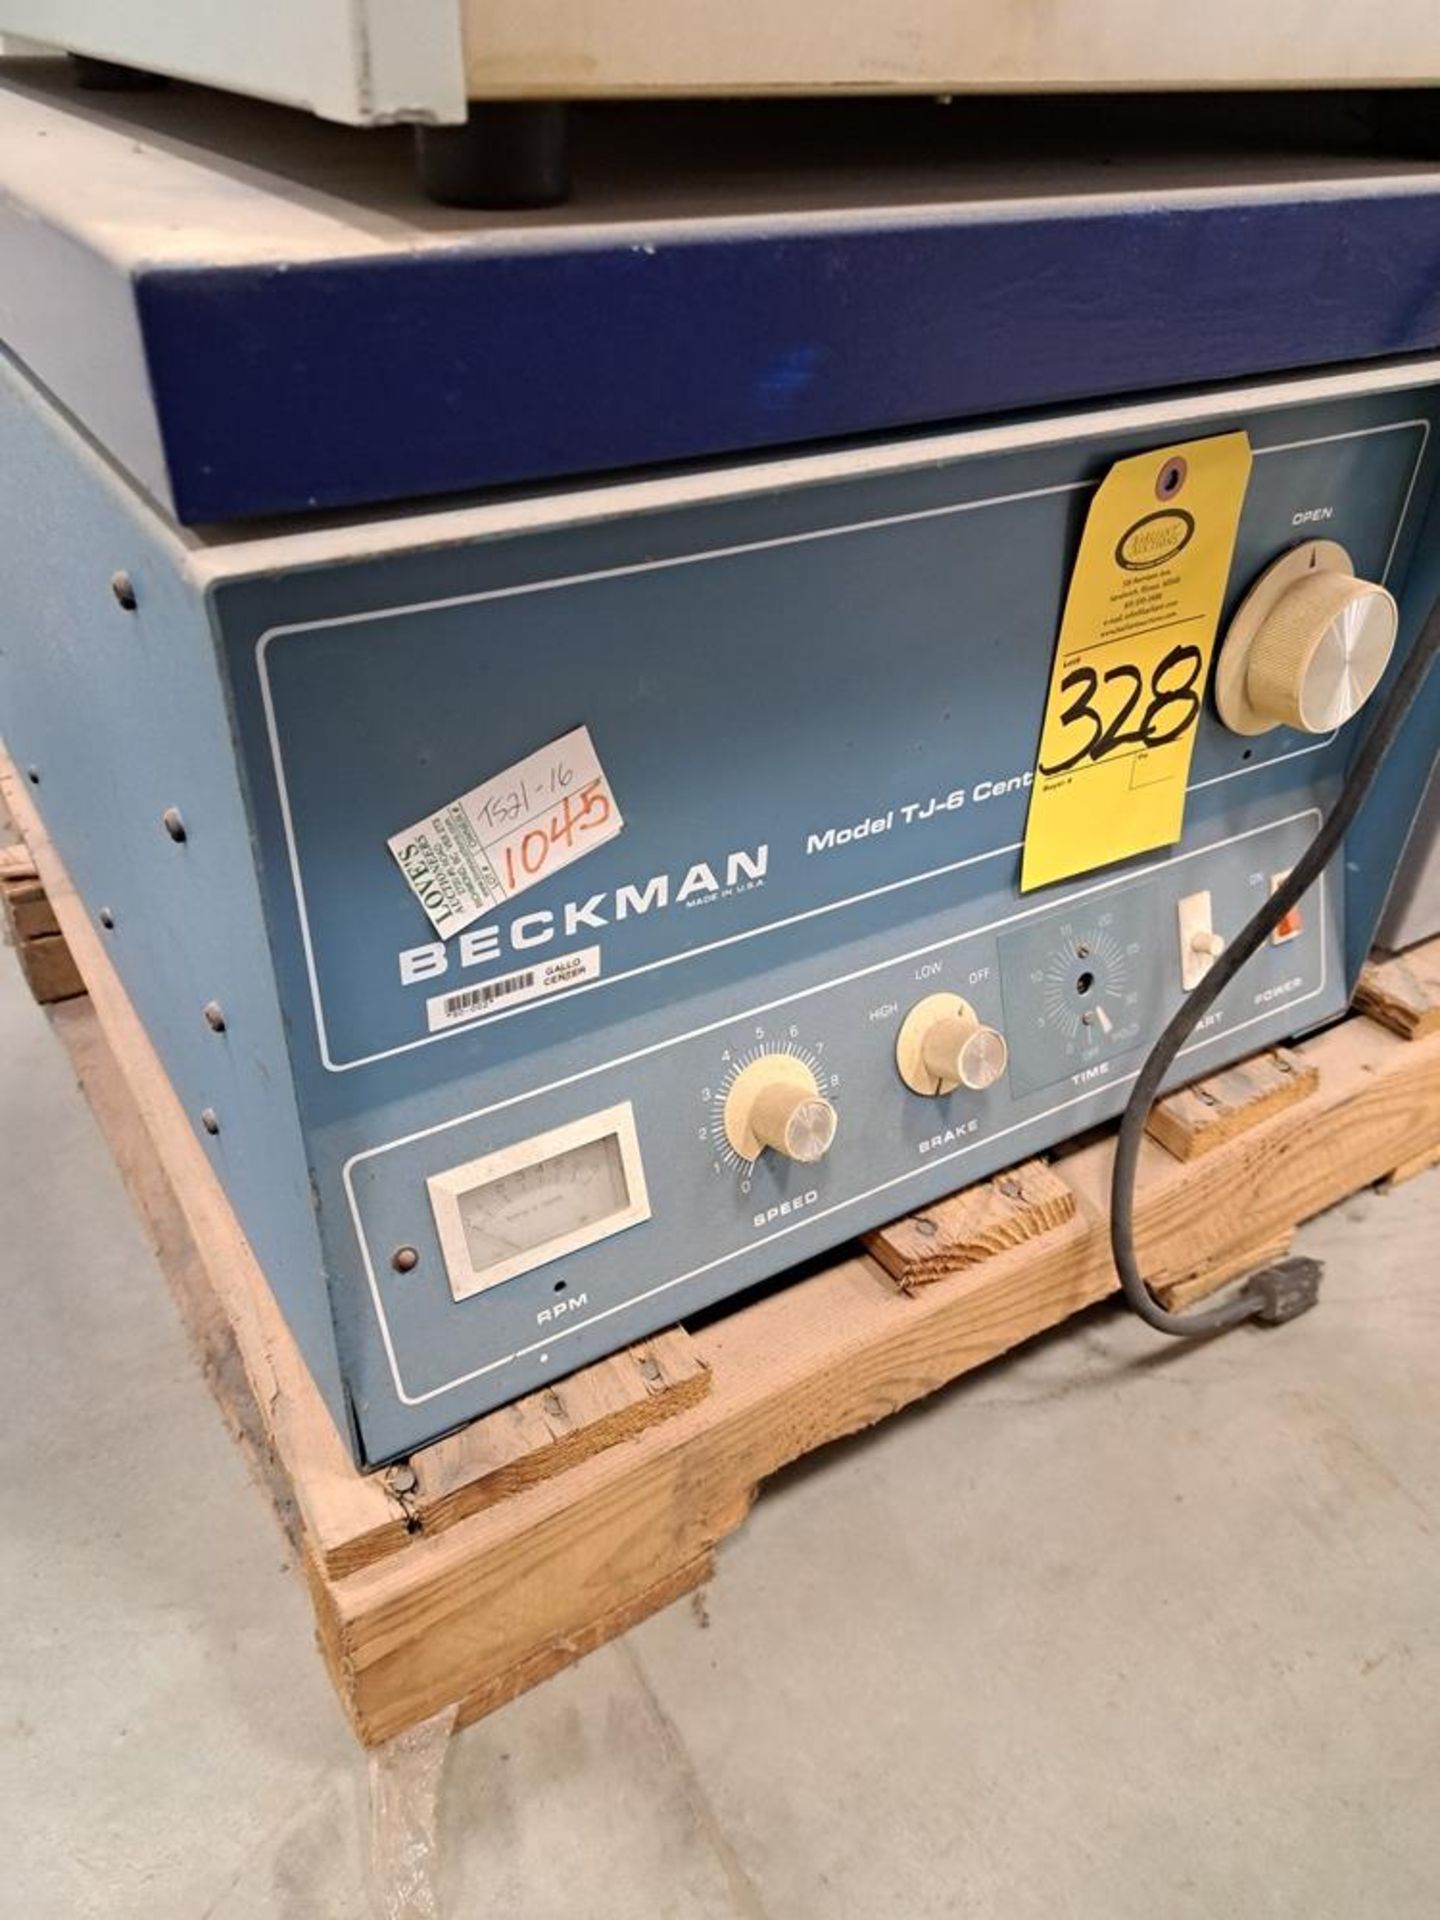 Beckman Mdl. TJ-6 Centrifuge, 120 volts (Required Loading Fee: $25.00) NO HAND CARRY (Price Is For